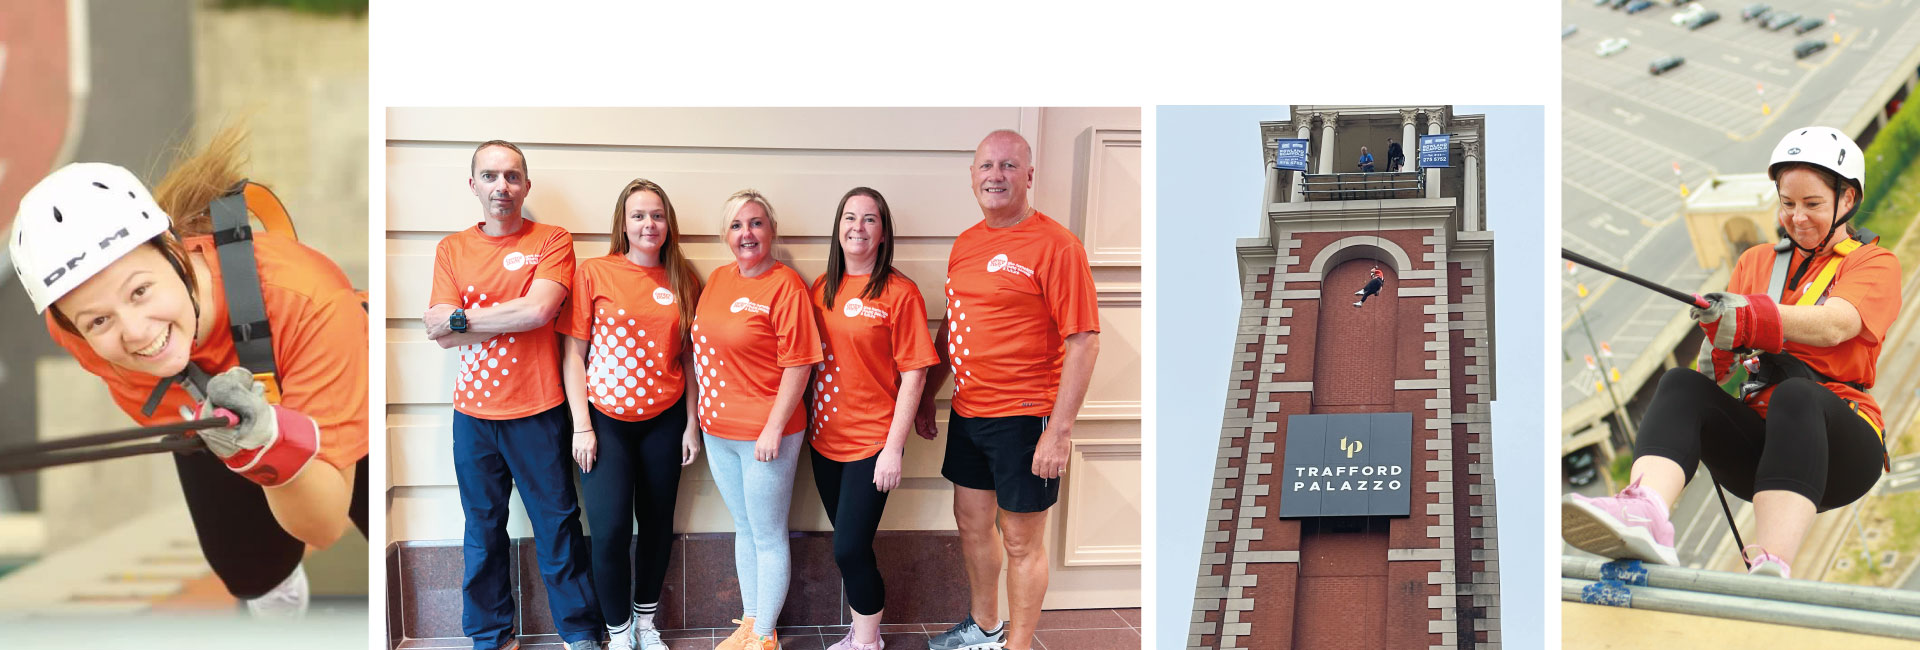 170ft Trafford Palazzo Abseil for Centrepoint